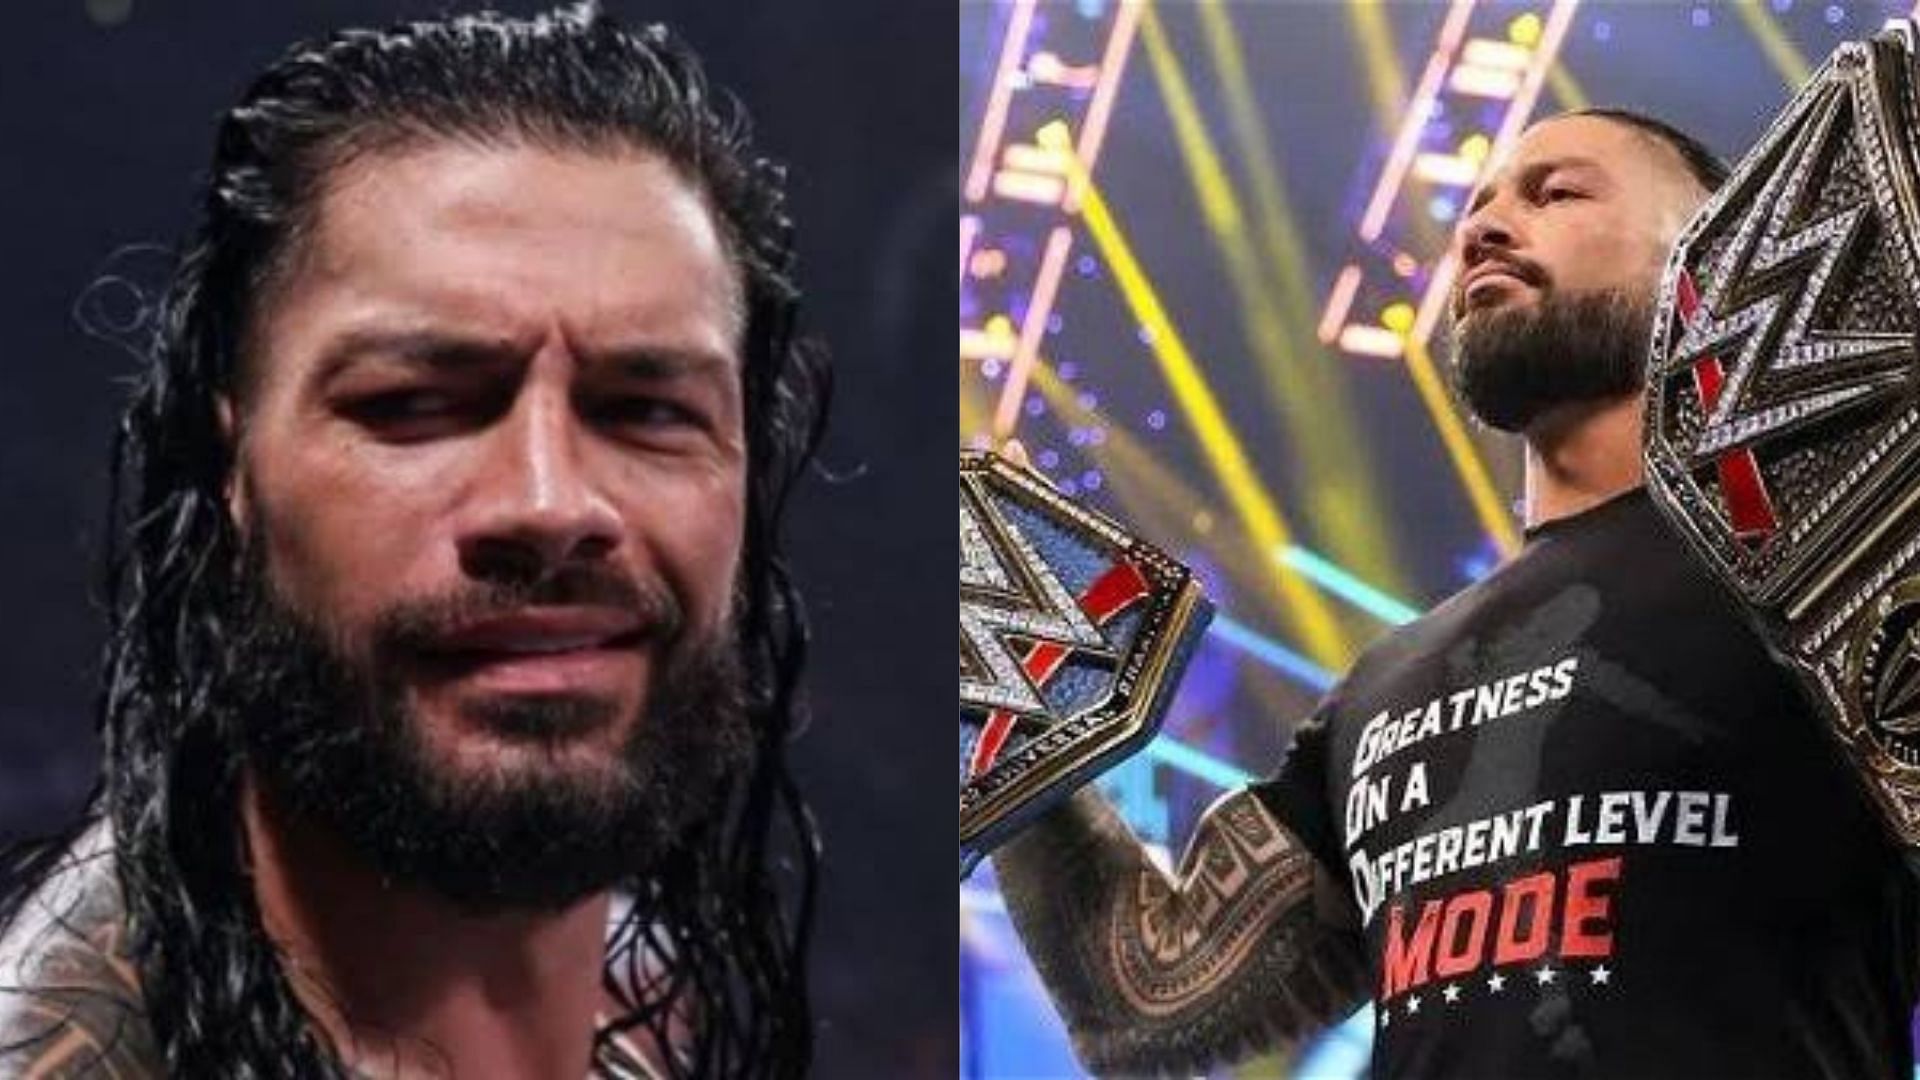 Roman Reigns is the current Undisputed WWE Universal Champion